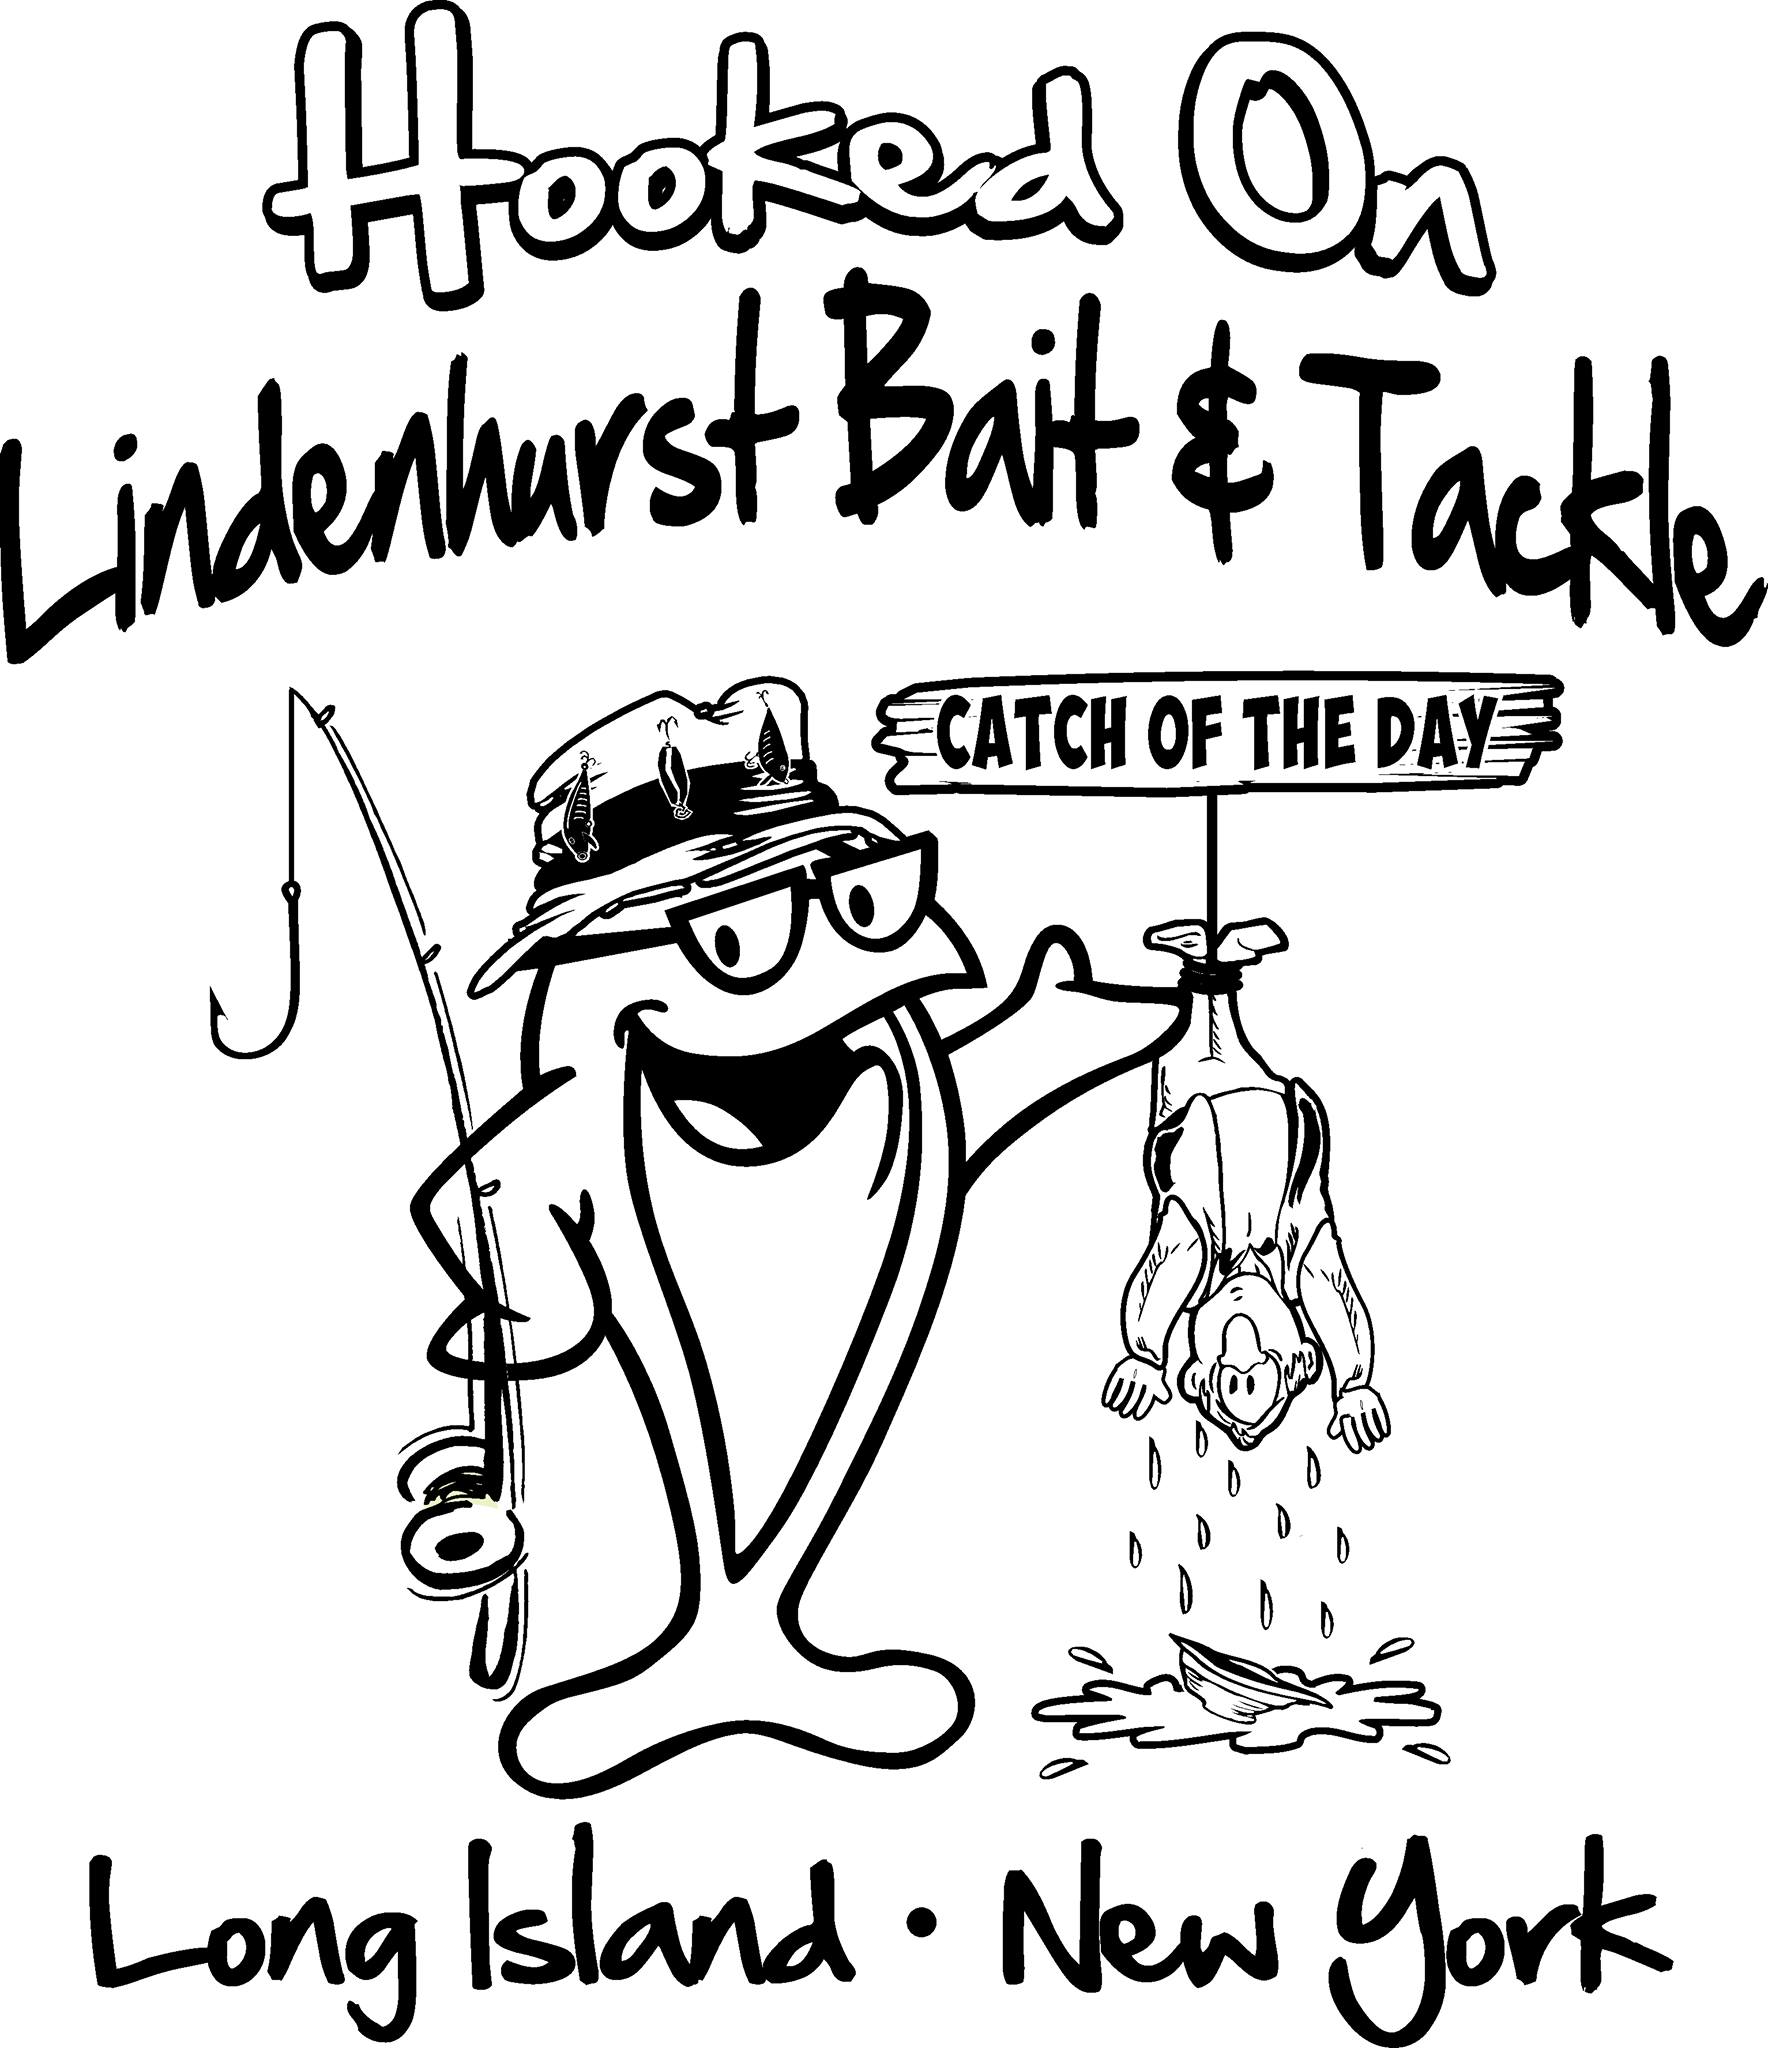 welcome to Lindenhurest Bait & Tackle